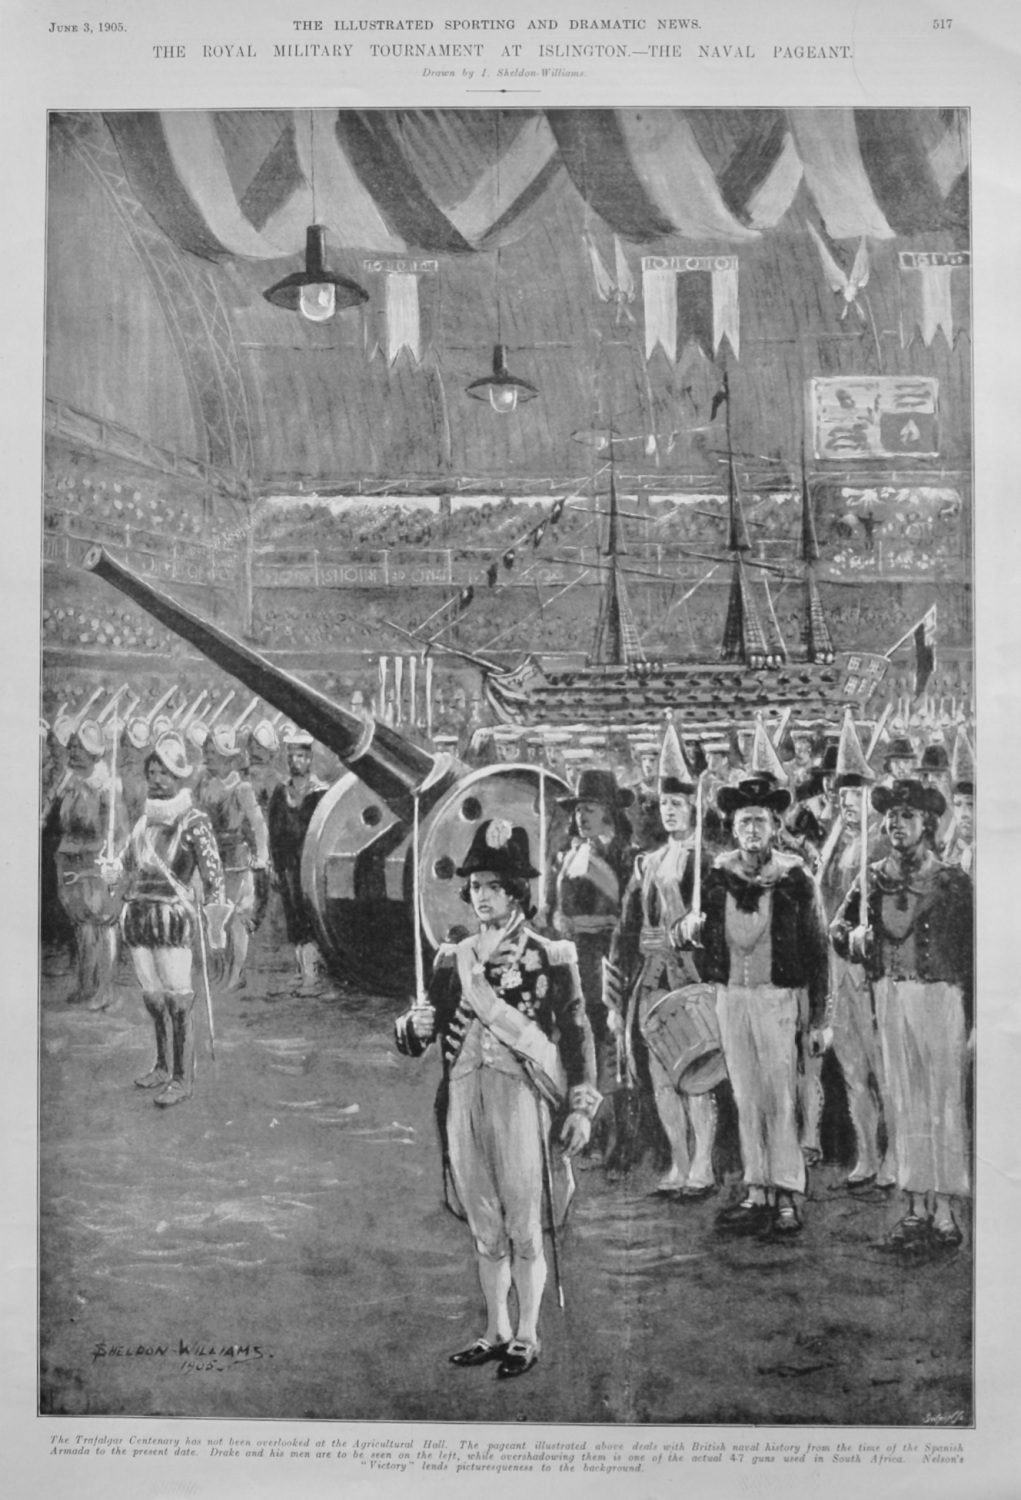 The Royal Military Tournament at Islington.- The Naval Pageant.  1905.